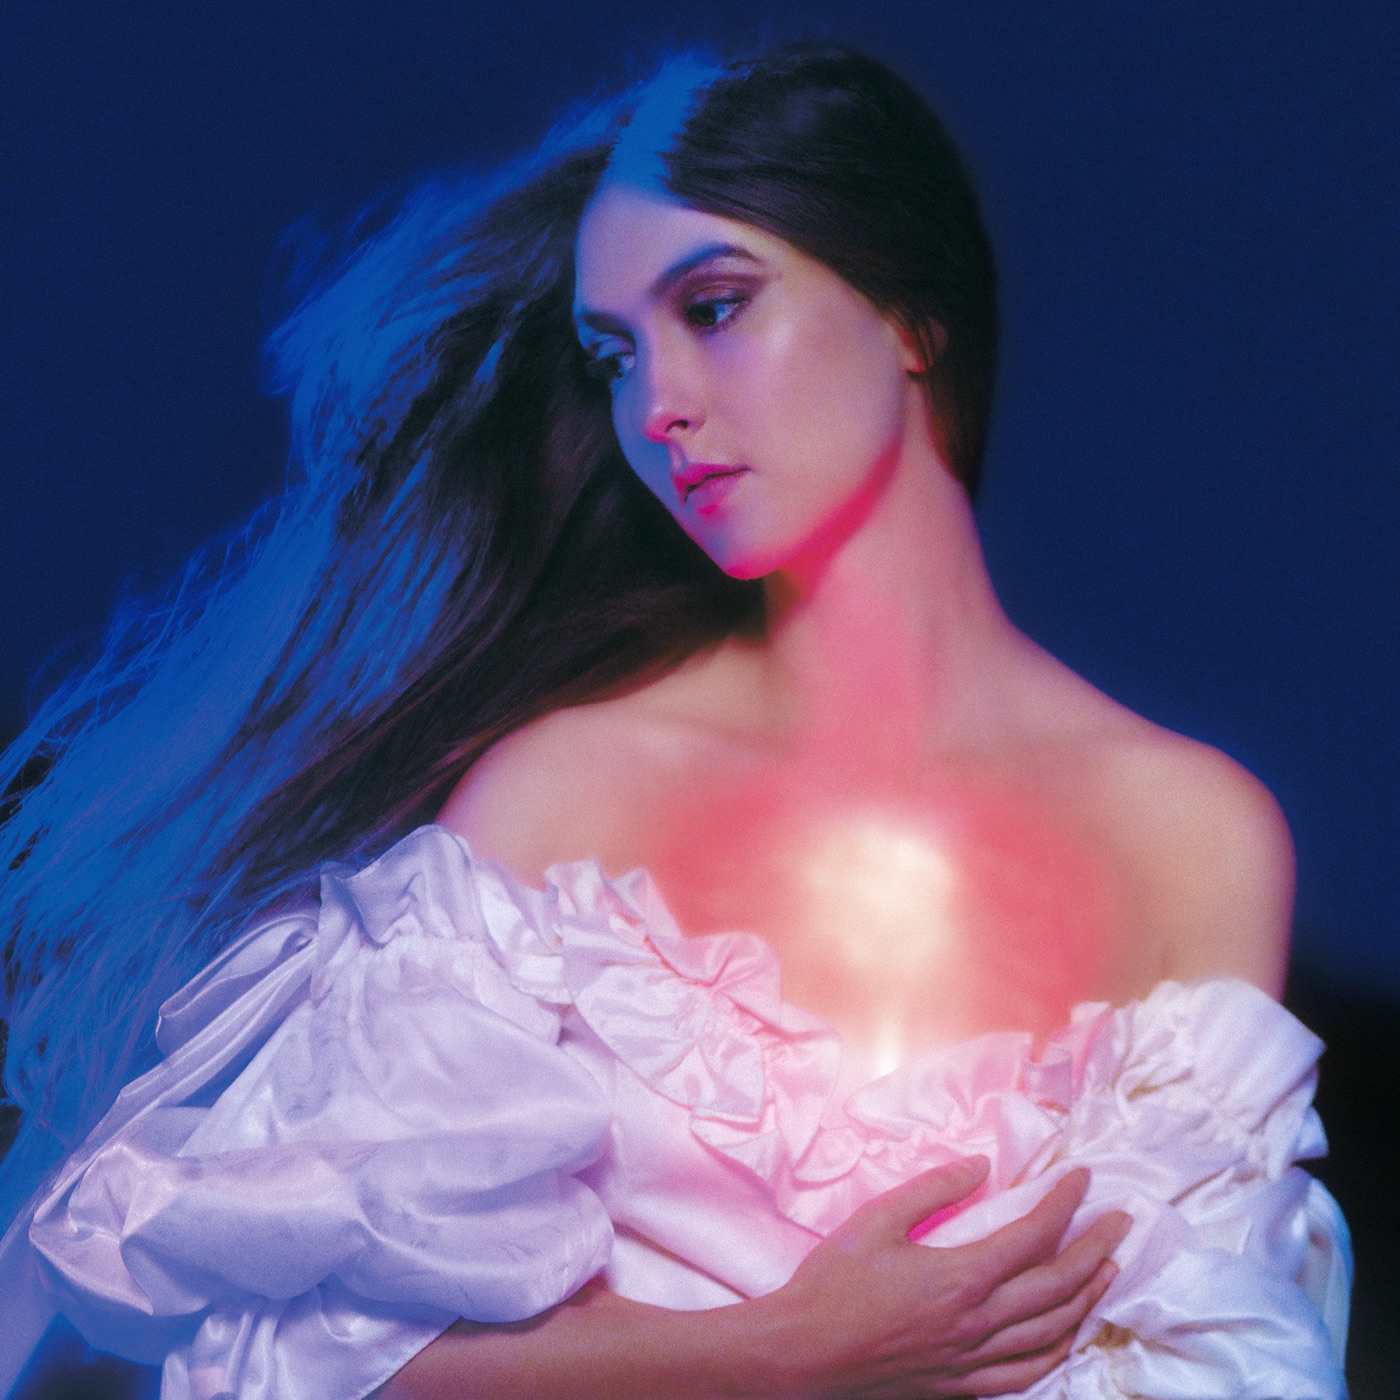 And In The Darkness, Hearts Aglow by Weyes Blood